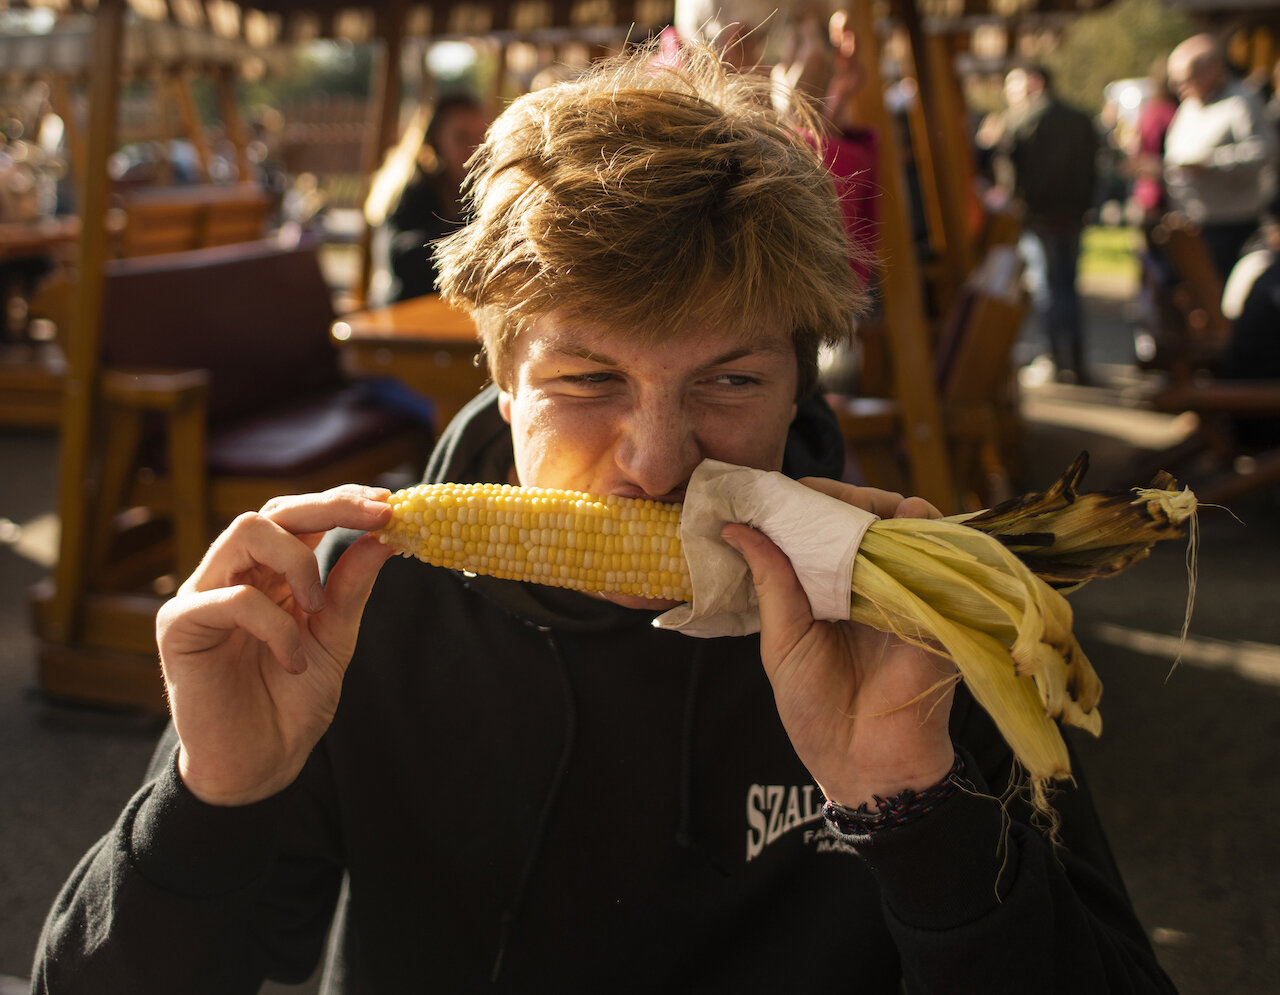  Ryan Graham eats steamed corn on the cob as Szalays Farm and Market where he goes every year to pick out his family’s pumpkins. 